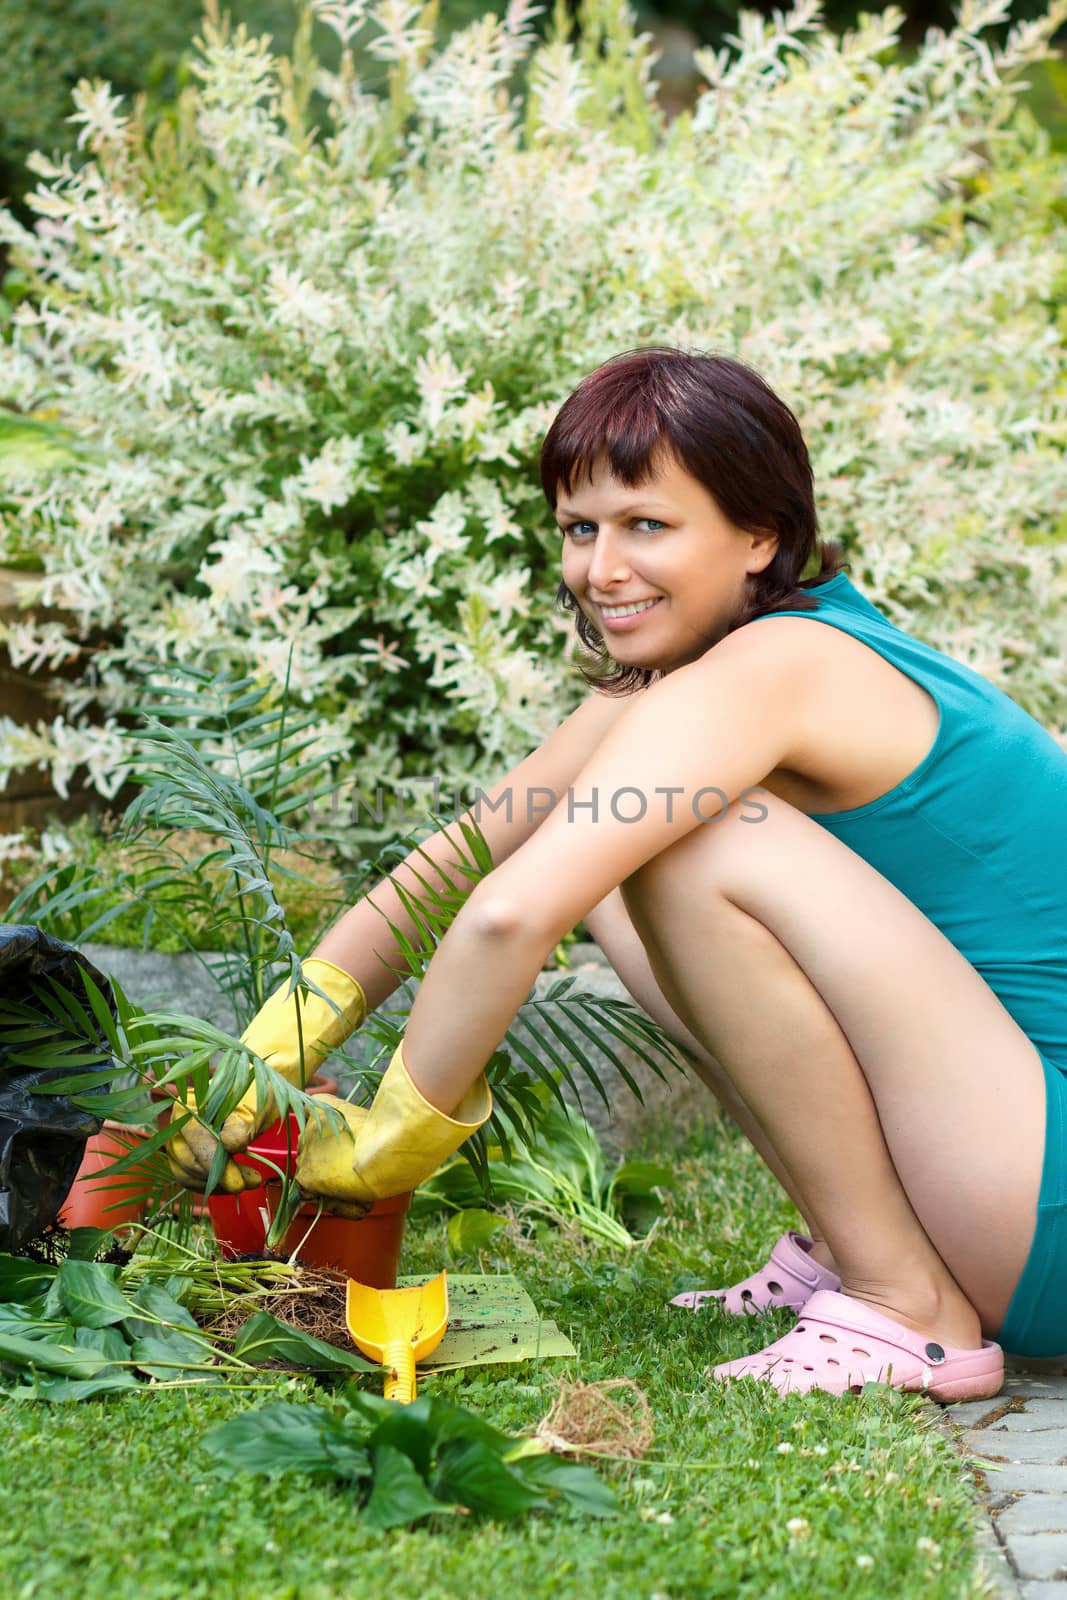 happy smiling middle age woman gardening, offsets the flowers in a pot